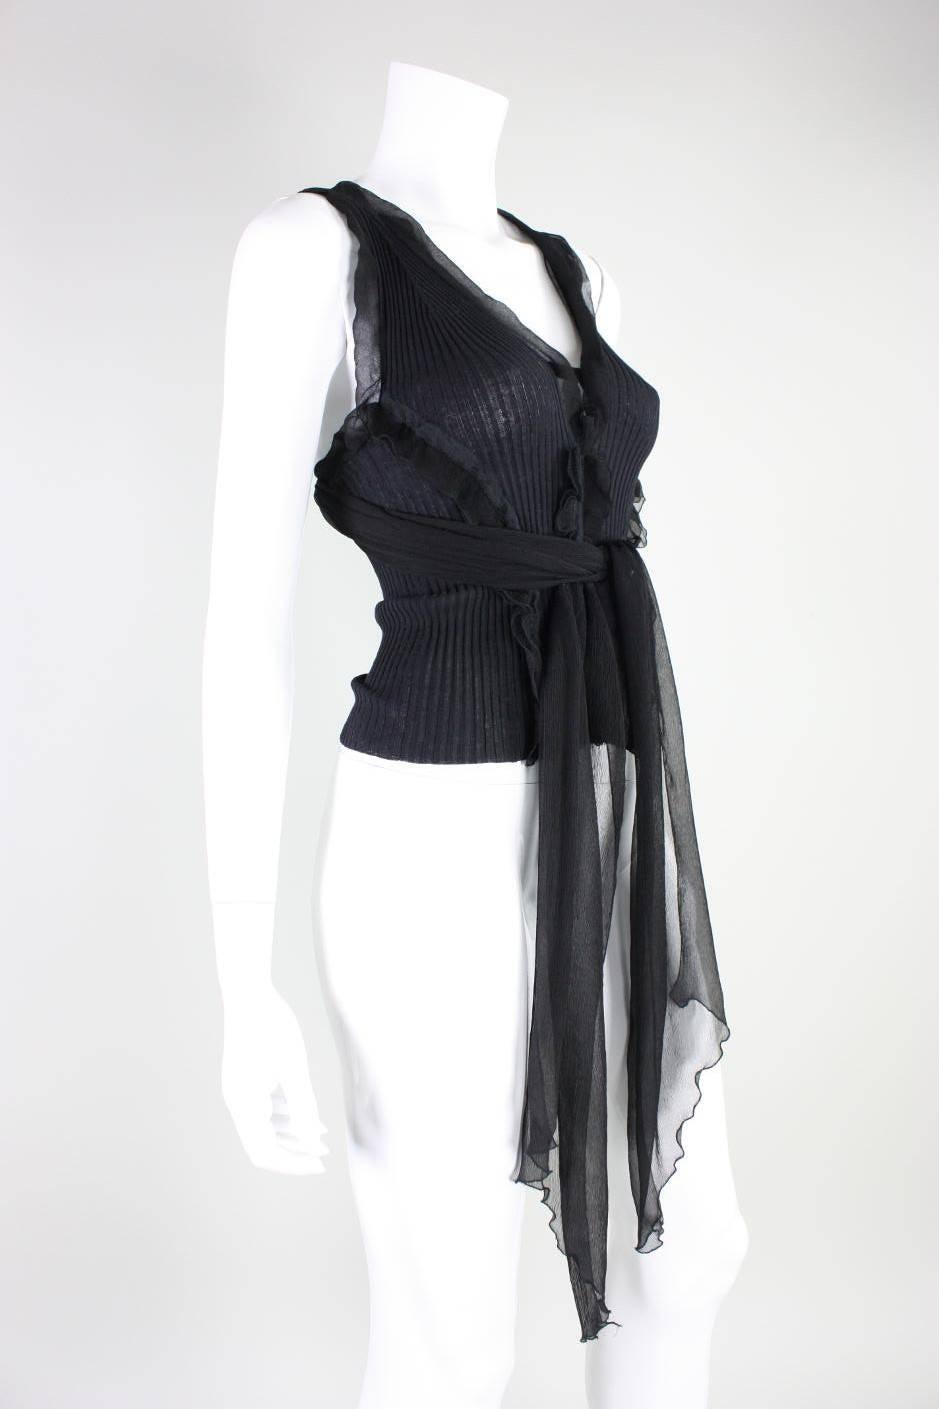 Vintage sweater vest from Jean-Paul Gaultier dates to the 1990's and is made of black ribbed wool knit with black silk chiffon detailing and tie.  Unlined.  No closures.  Never worn.

Labeled size Small.